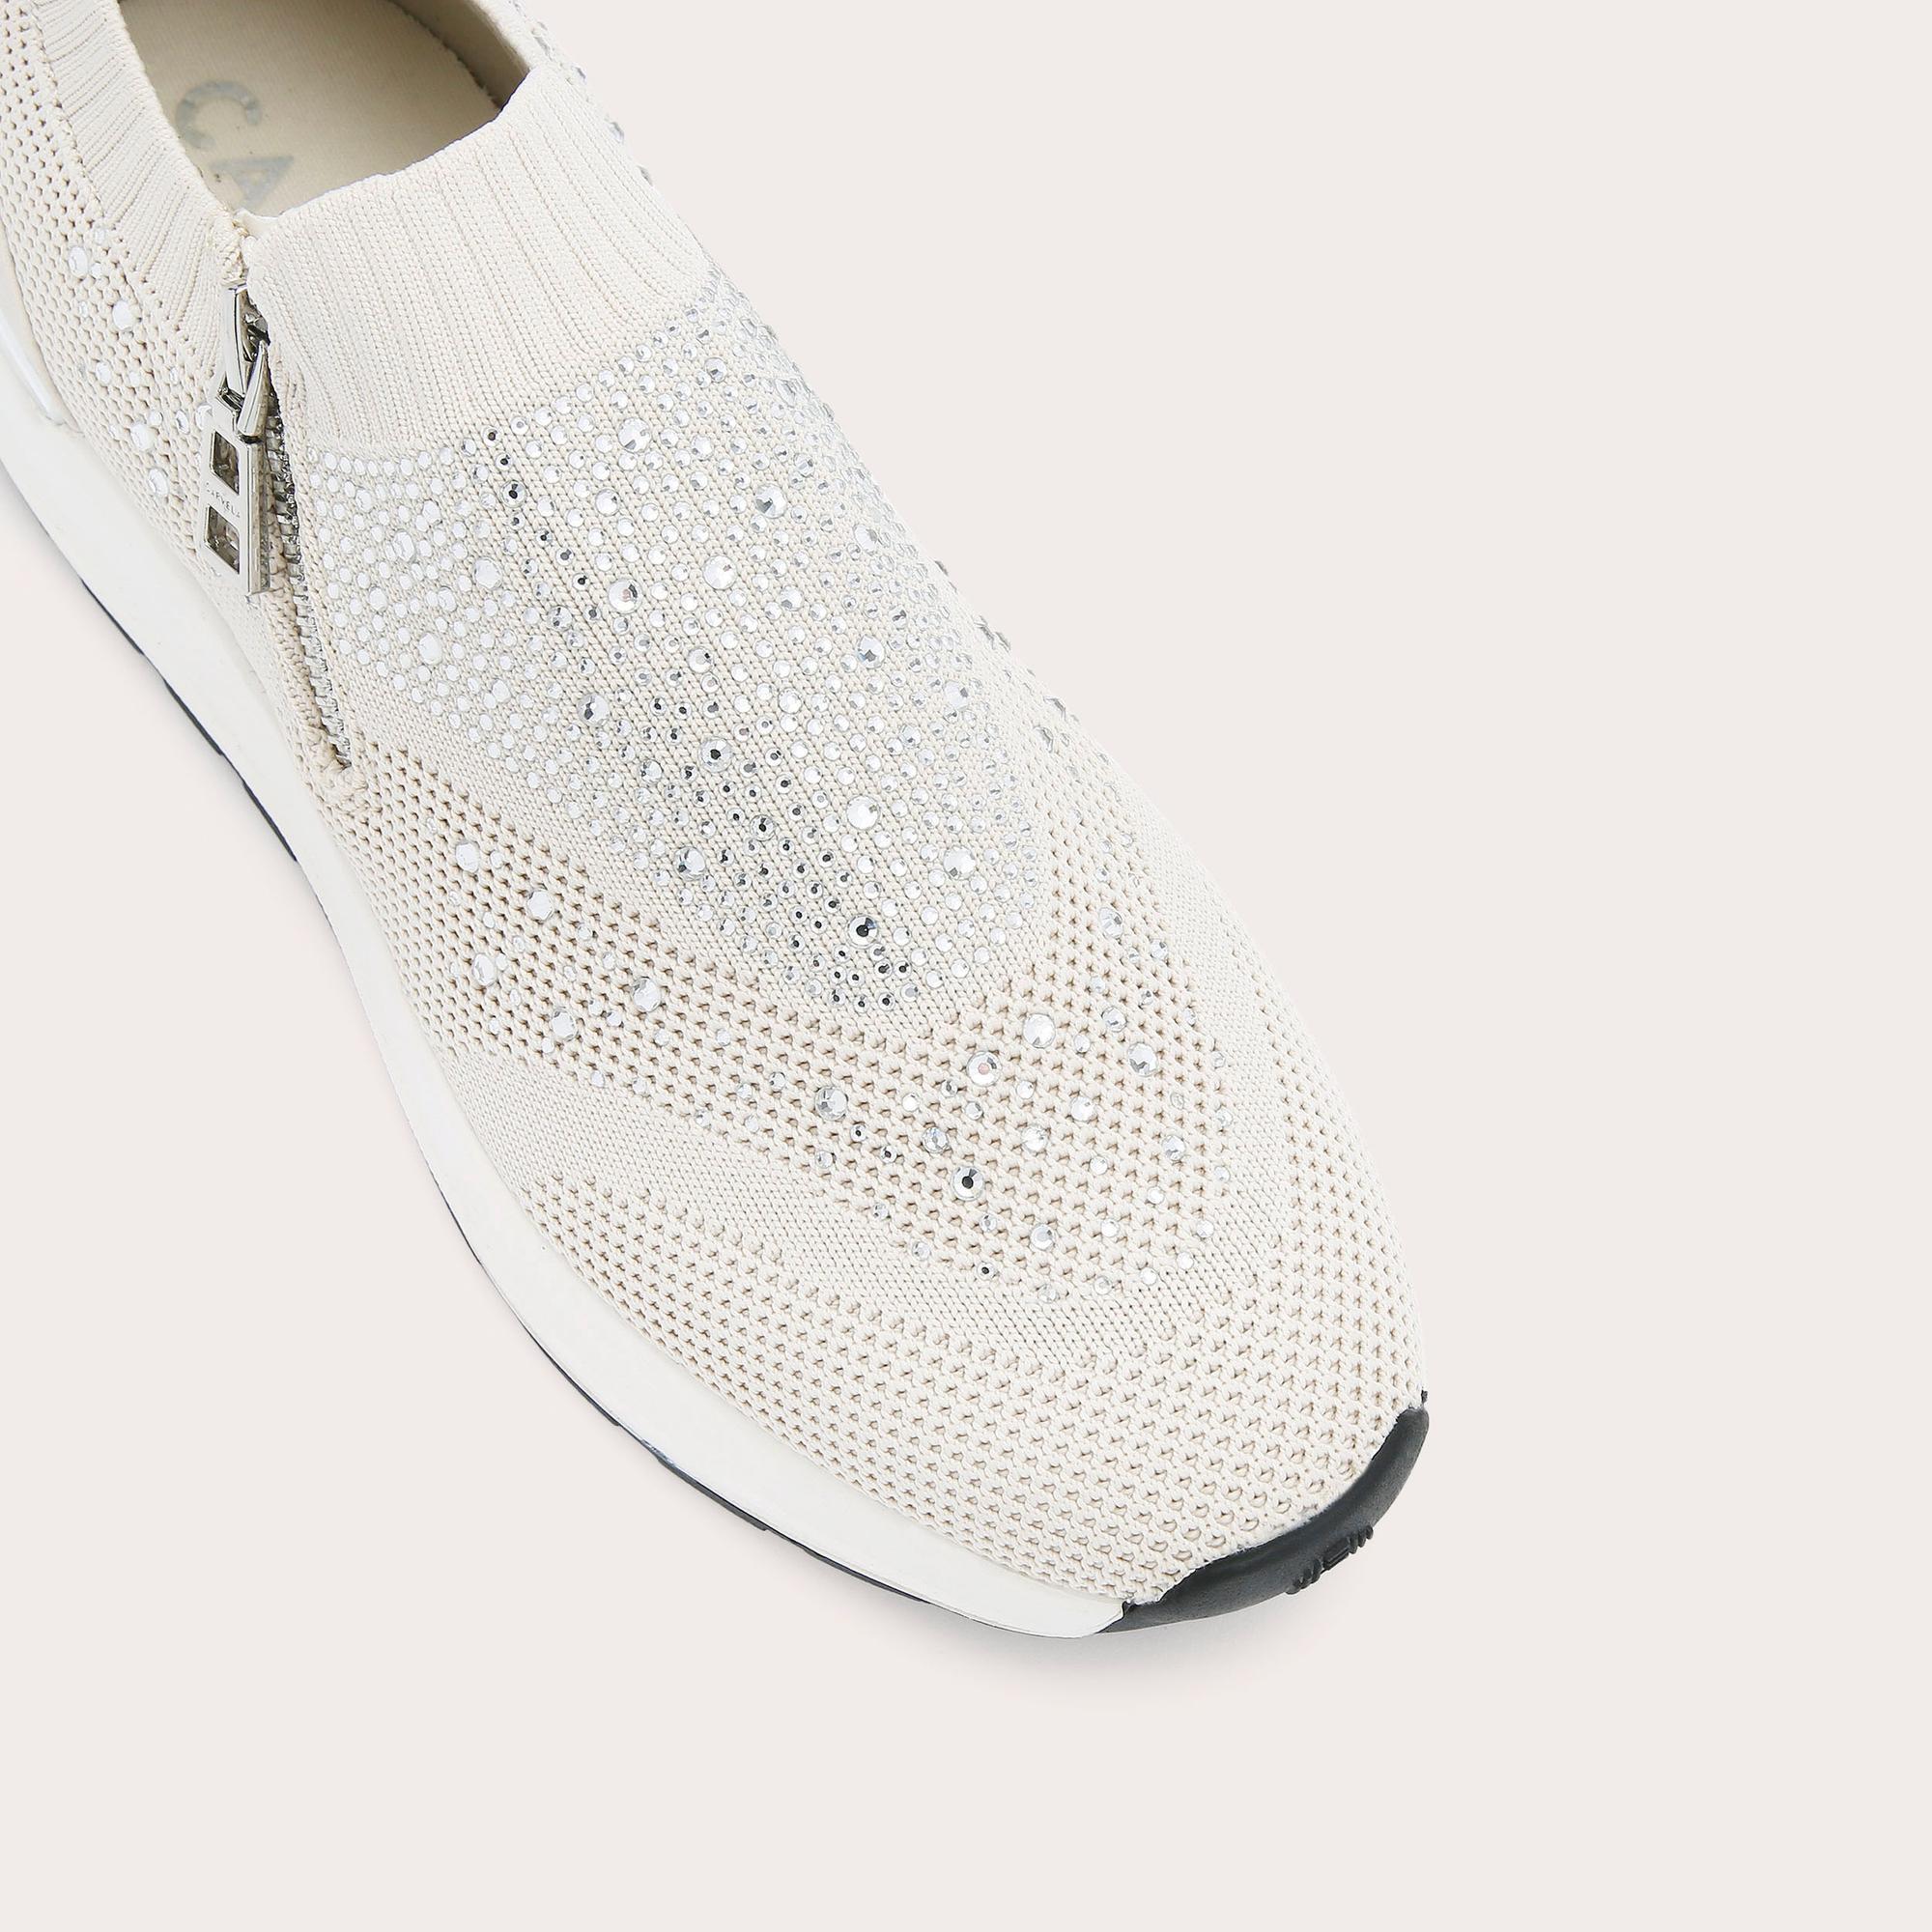 RIO ZIP White Slip On Trainers by CARVELA